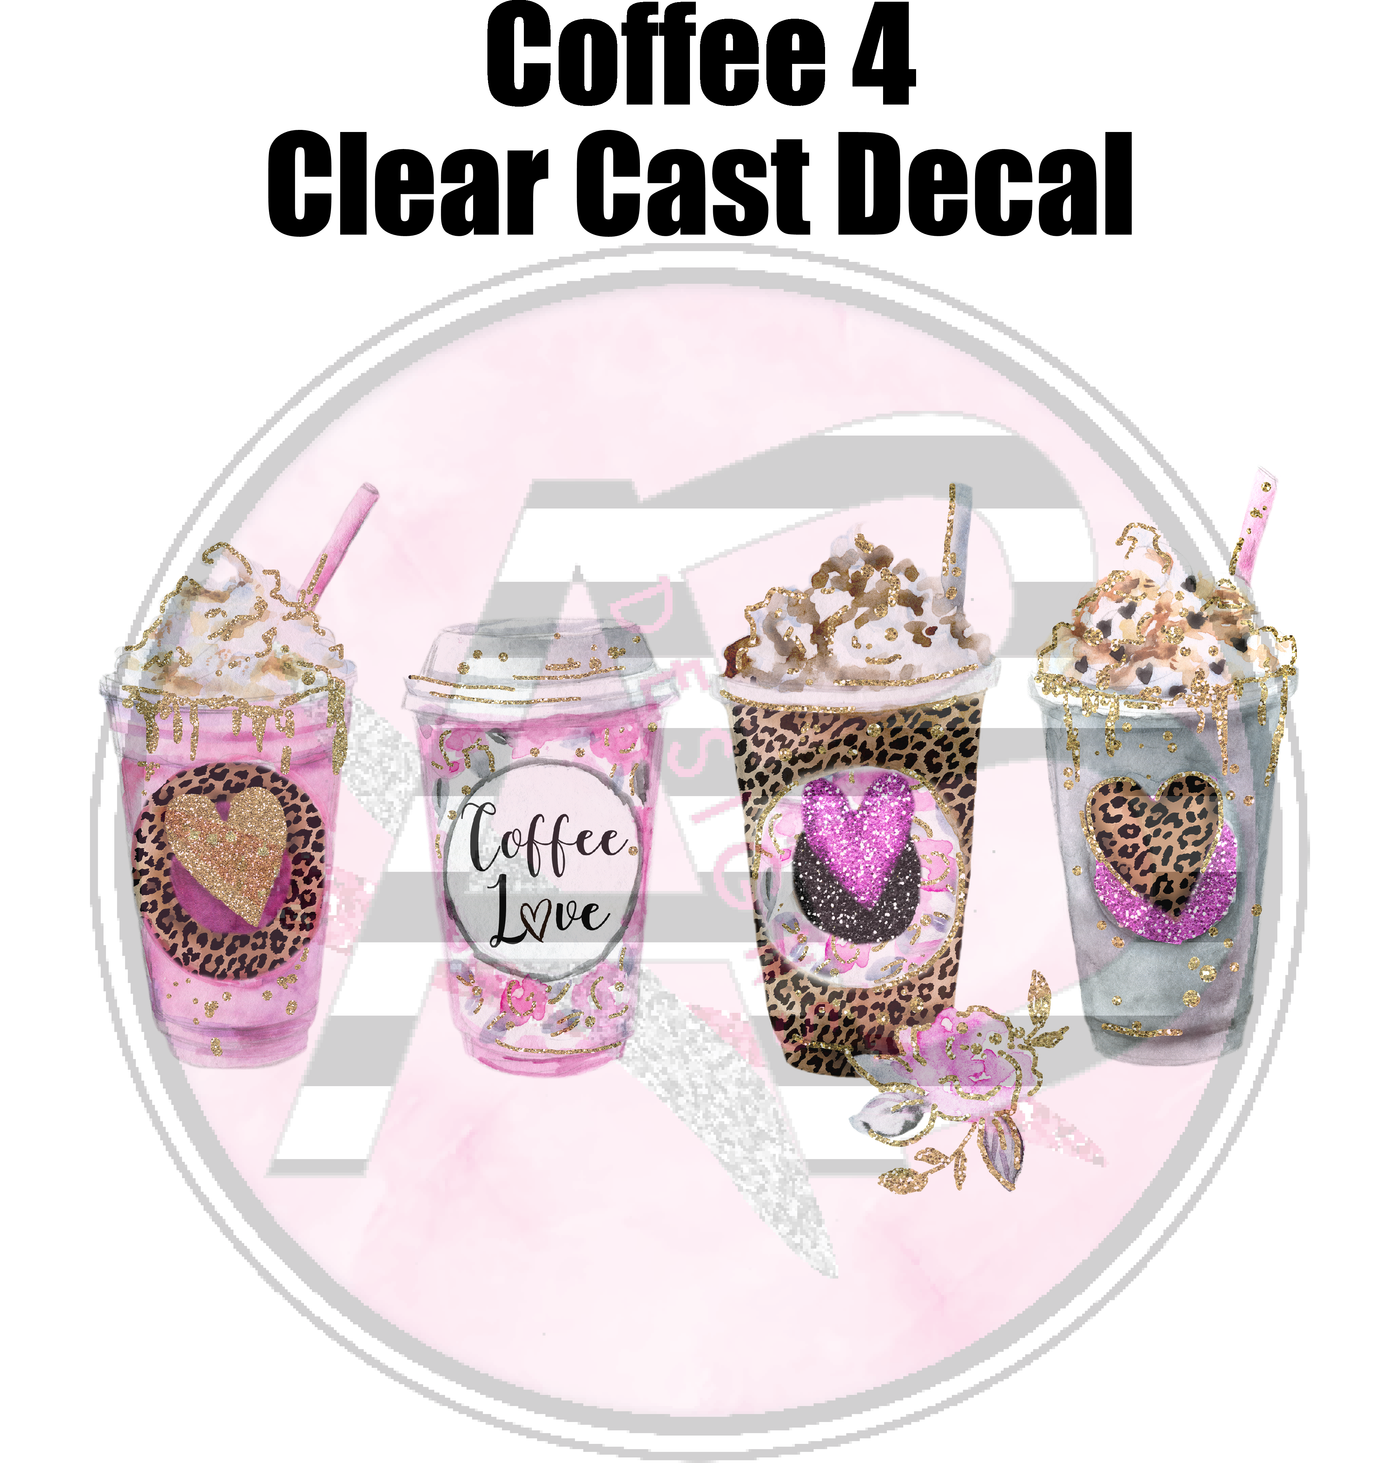 Coffee 4 - Clear Cast Decal